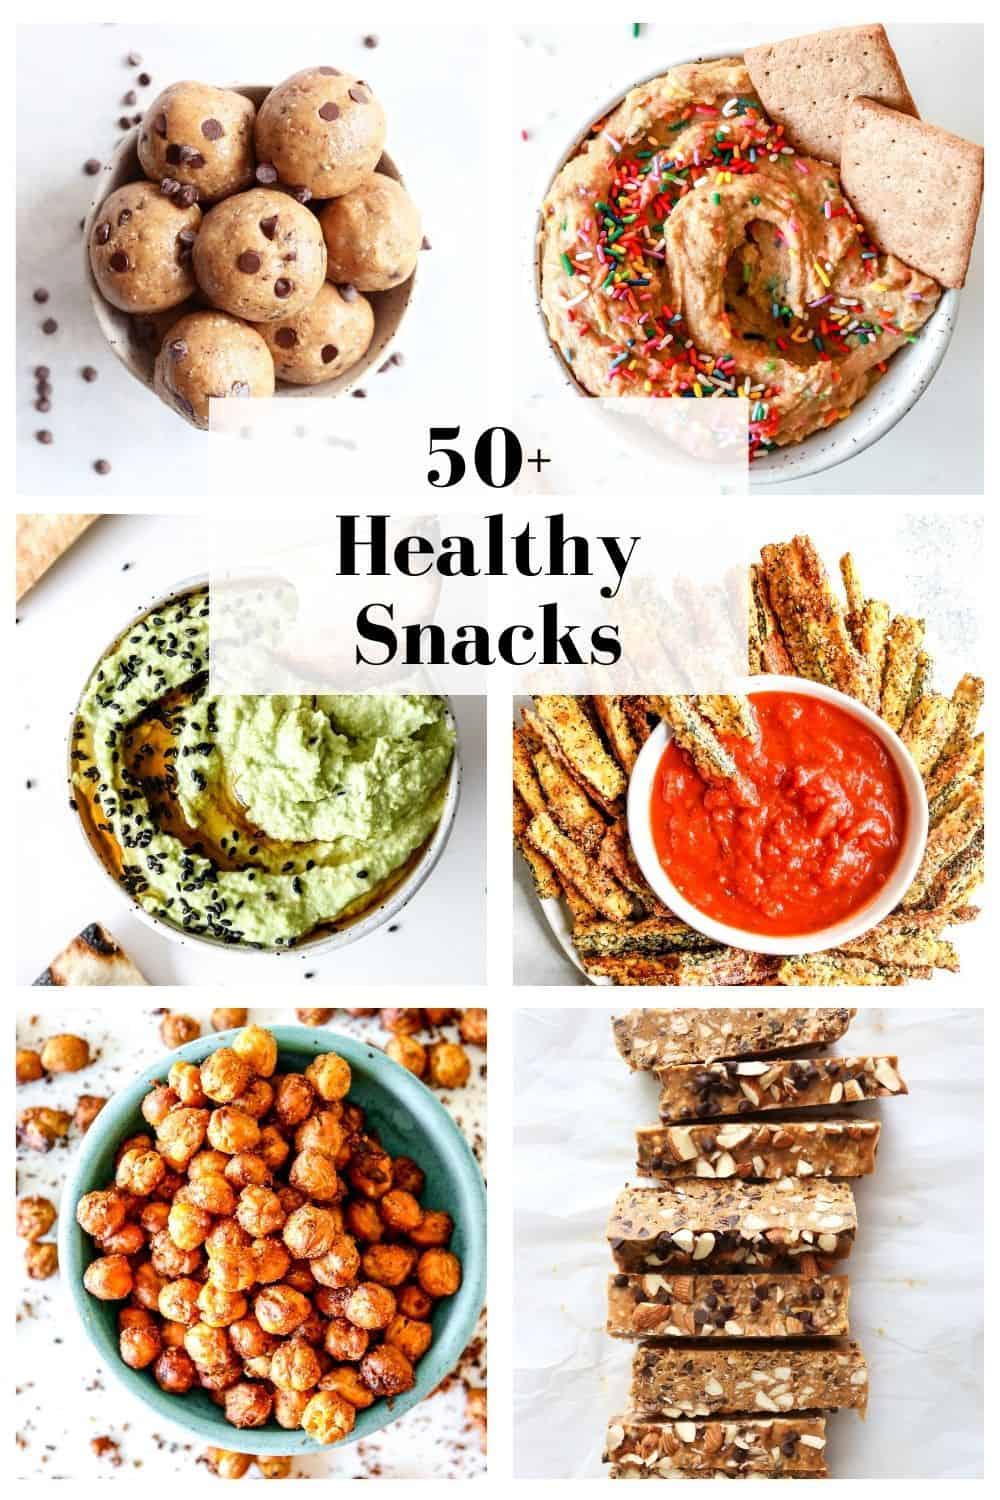 50+ Easy & Delicious Healthy Snacks - The Toasted Pine Nut